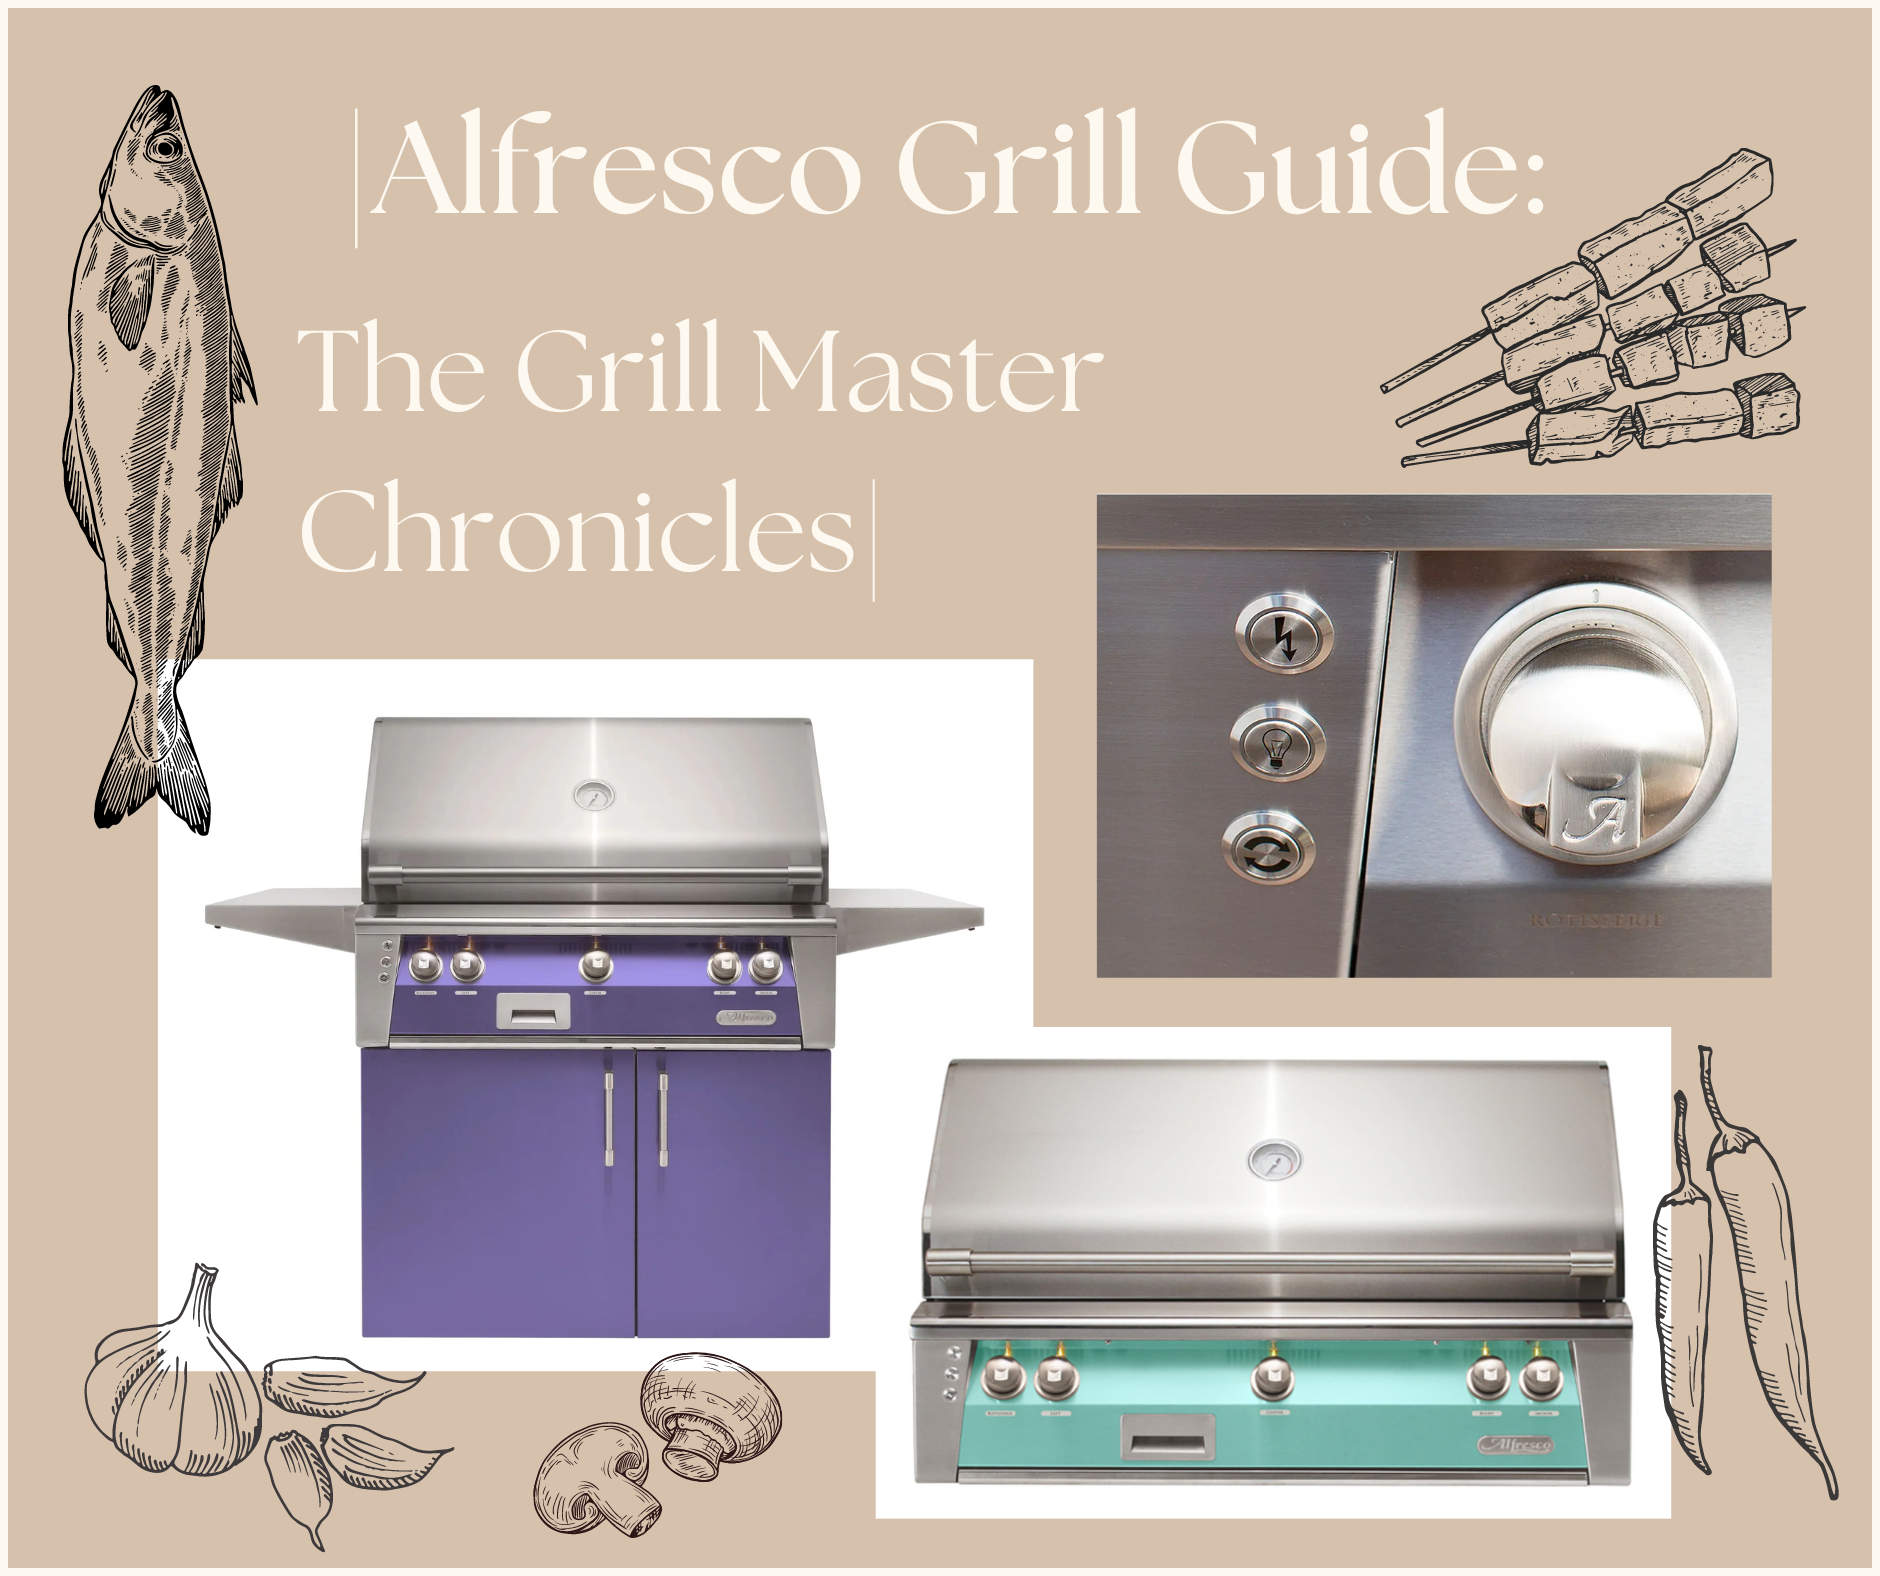 Featured image for “Alfresco Grill Guide: The Grill Master Chronicles”